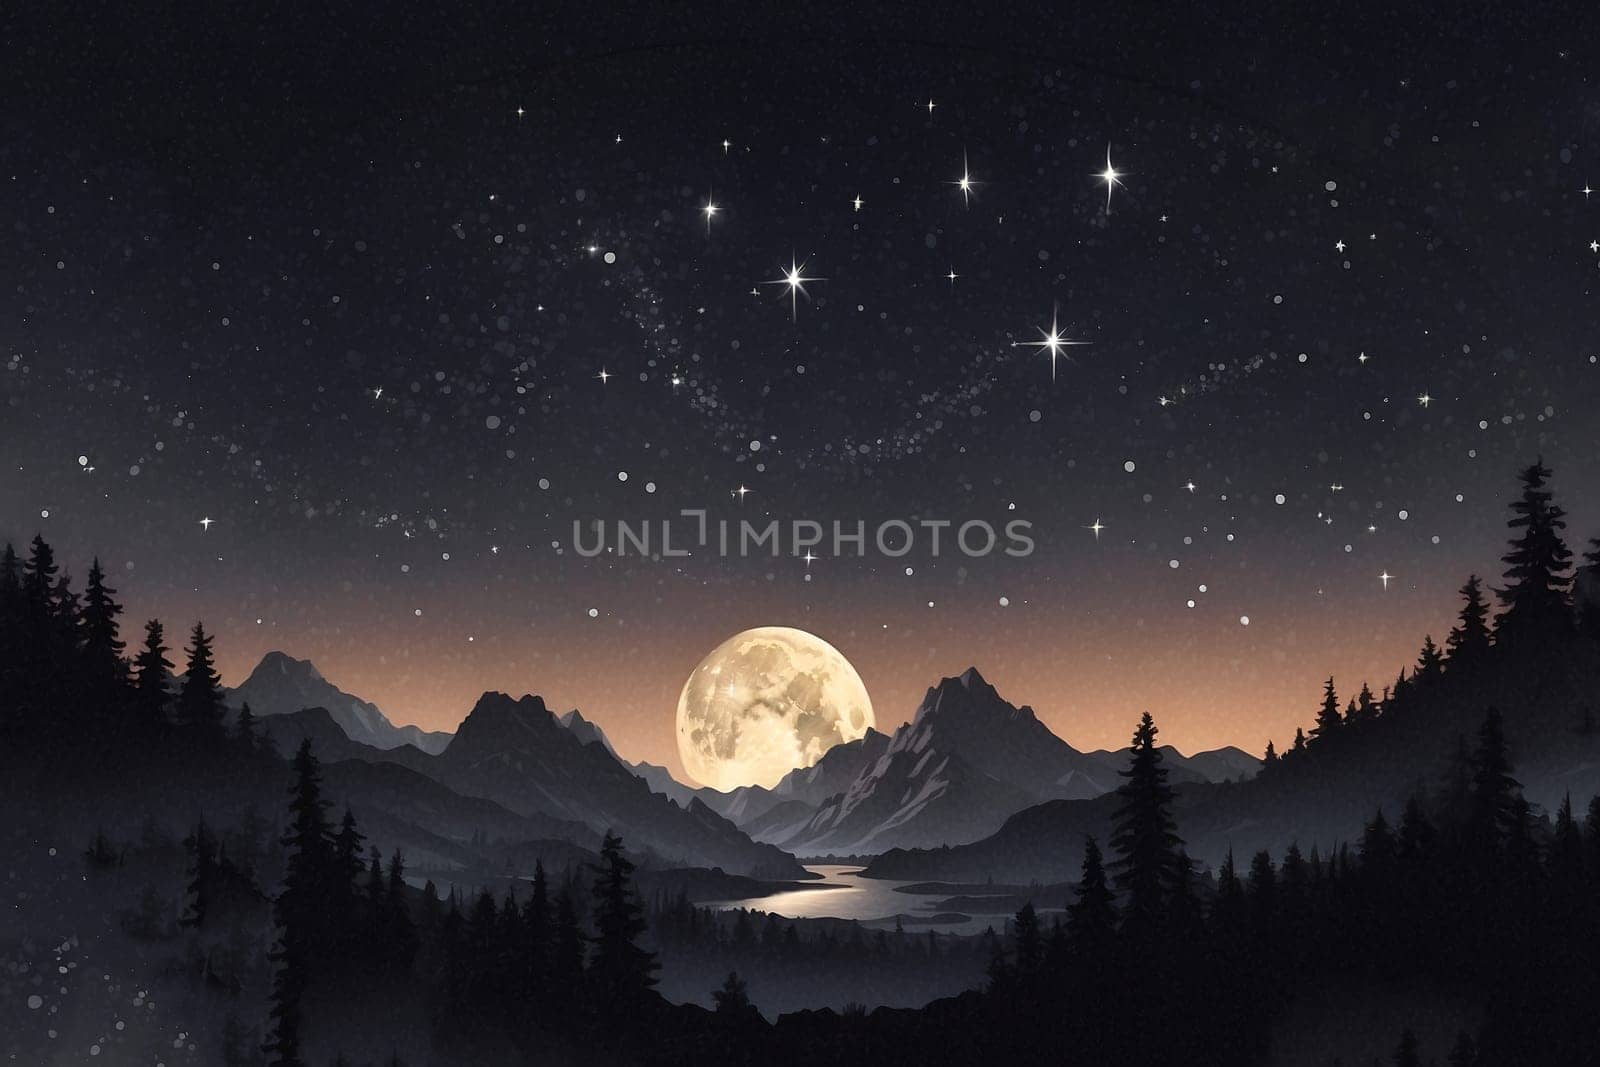 A captivating photo capturing the beauty of a night scene illuminated by a full moon and adorned with twinkling stars.